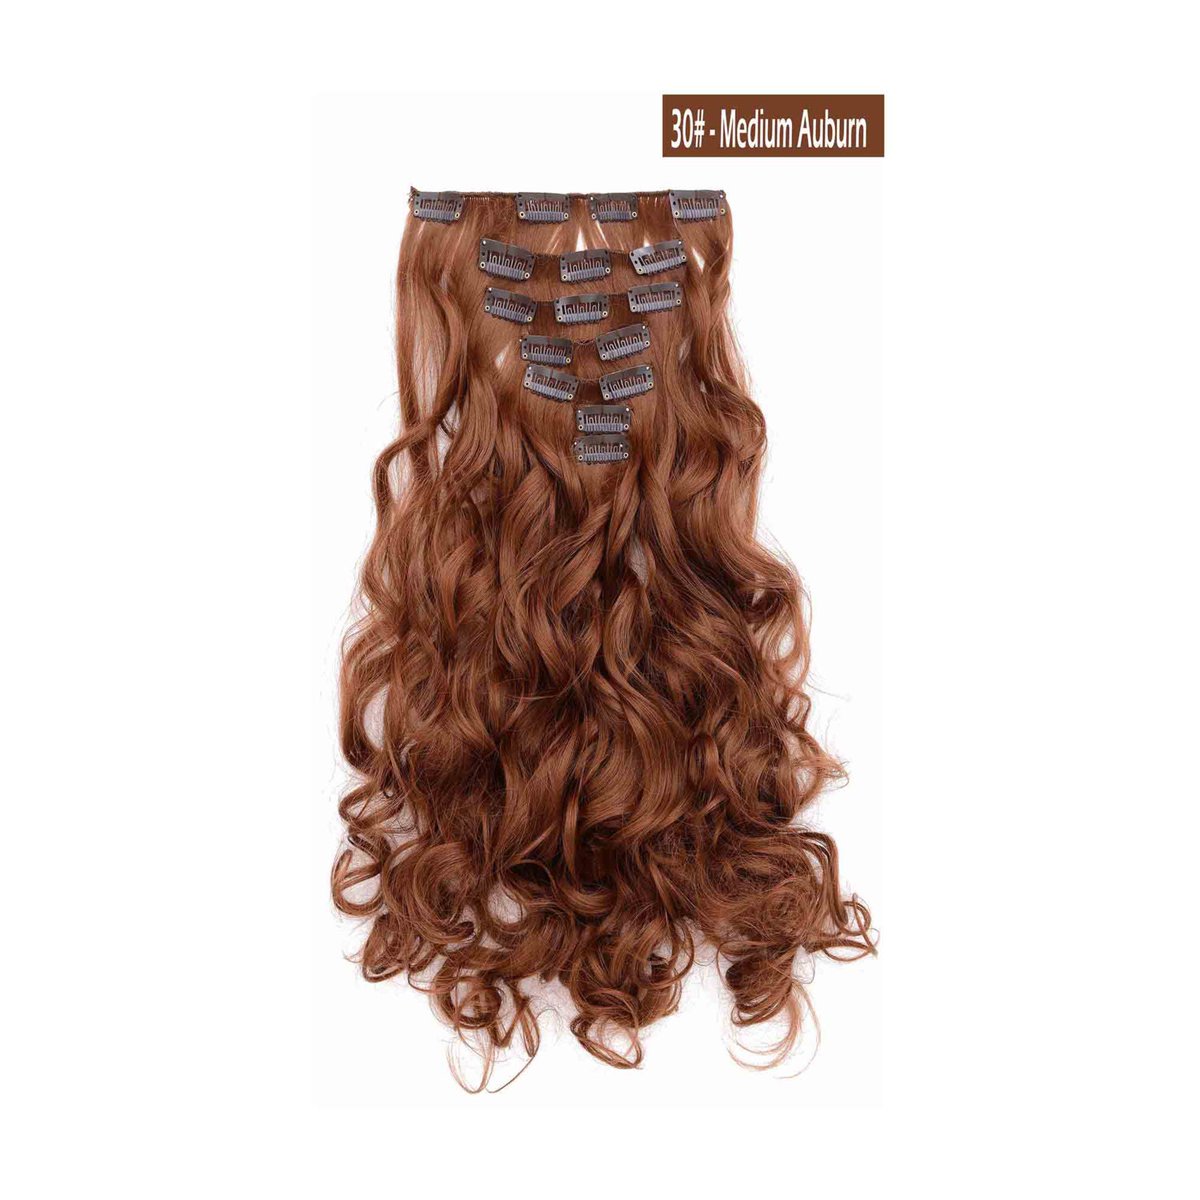 Thanks for the great review mary ann m. ★★★★★! etsy.me/3CLby35 #etsy #hairextensions #clipinextensions #curlyhair #cosplaywig #clipinhair #heatresistant #hairweave #redhairextension #hairpieces